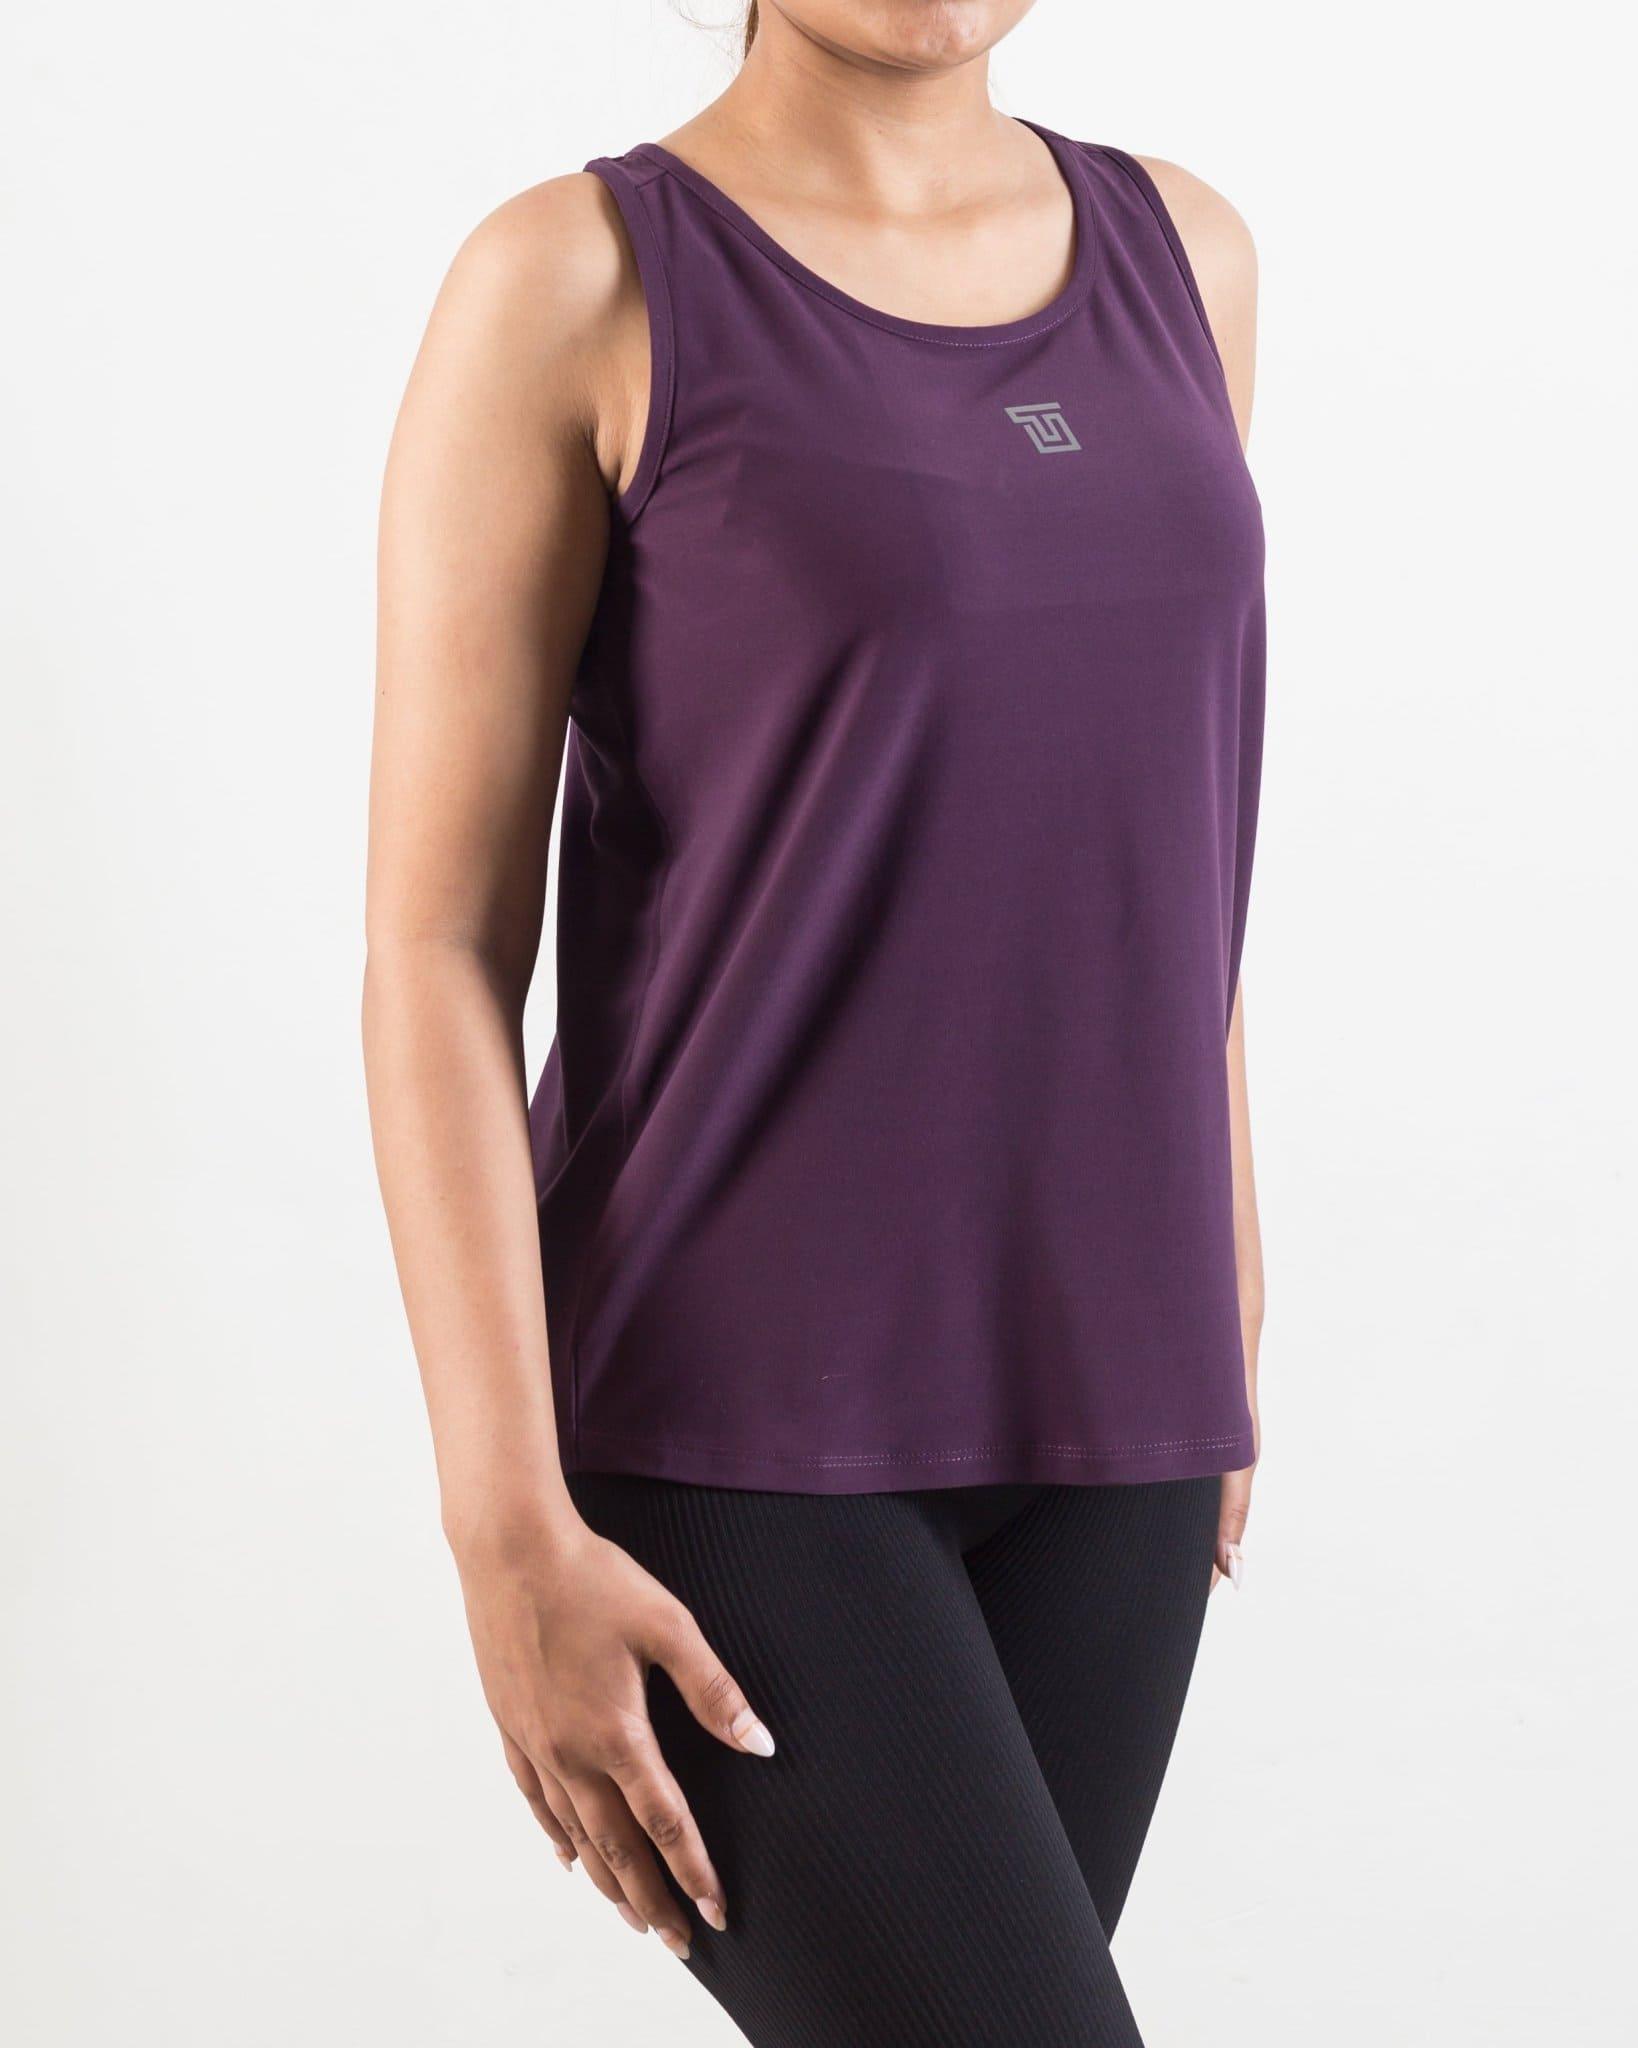  VOOVEEYA Y Back Workout Tank Tops for Women Built in